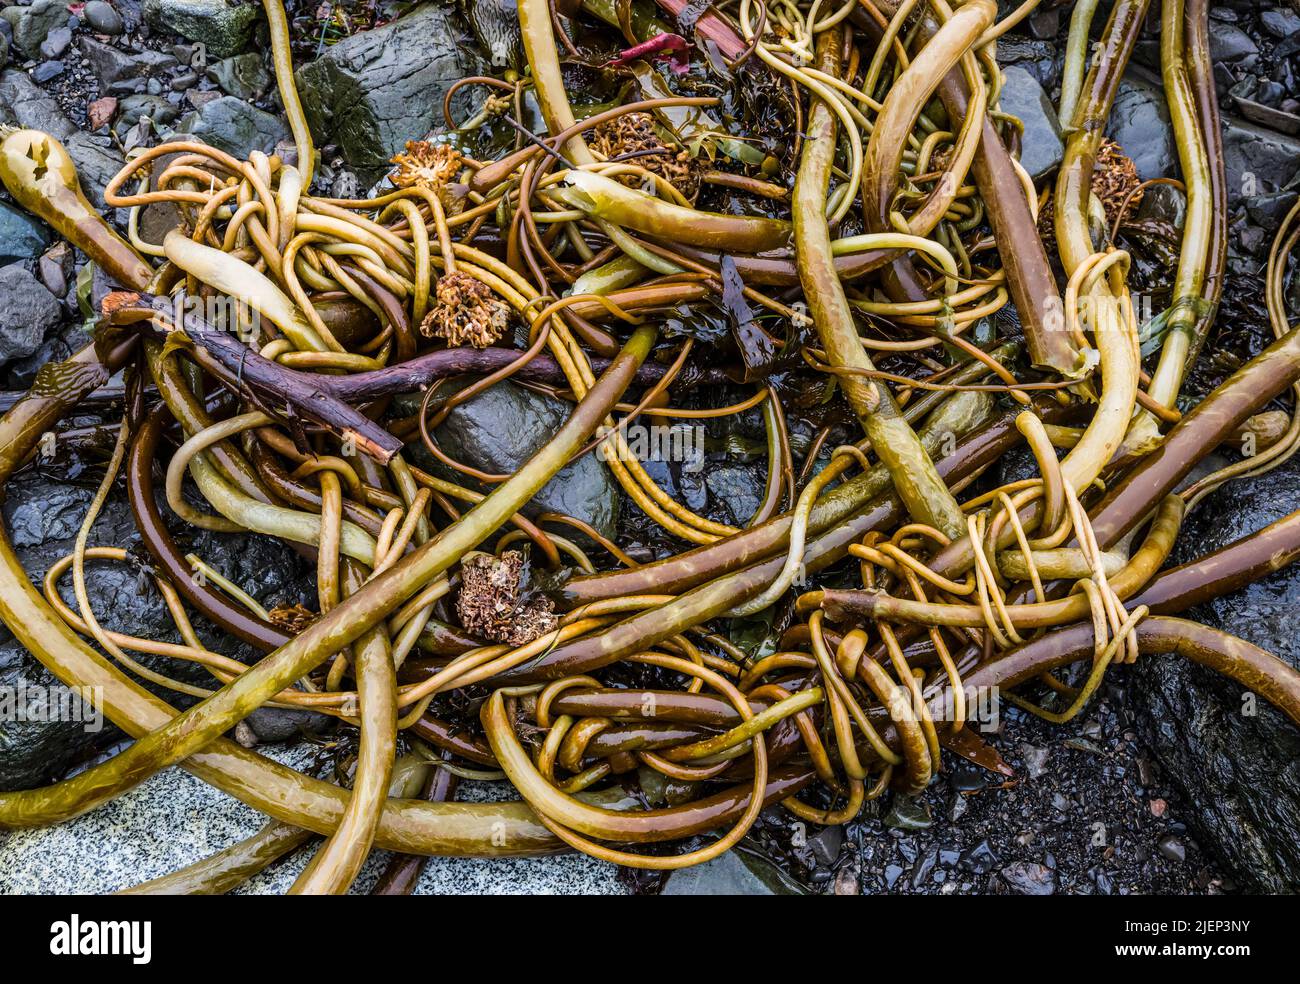 Kelp washed up at low tide along the coast near the Wild Pacific Coast trail. Stock Photo